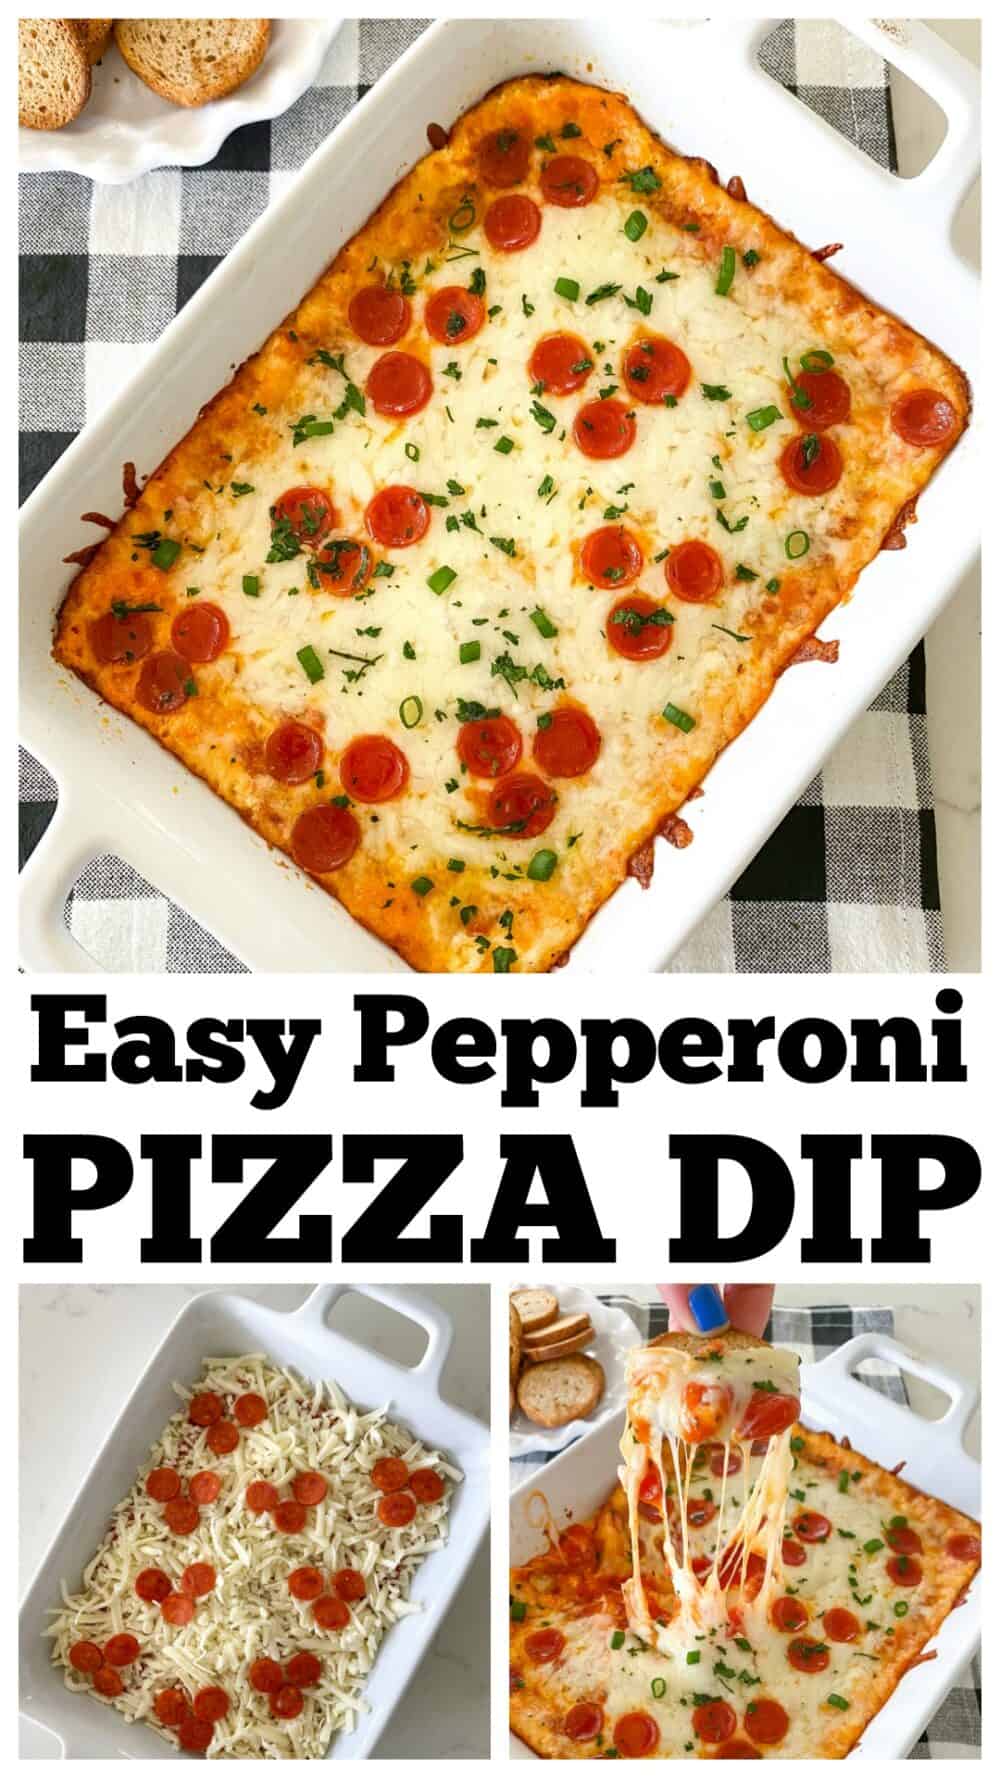 photo collage of pizza dip